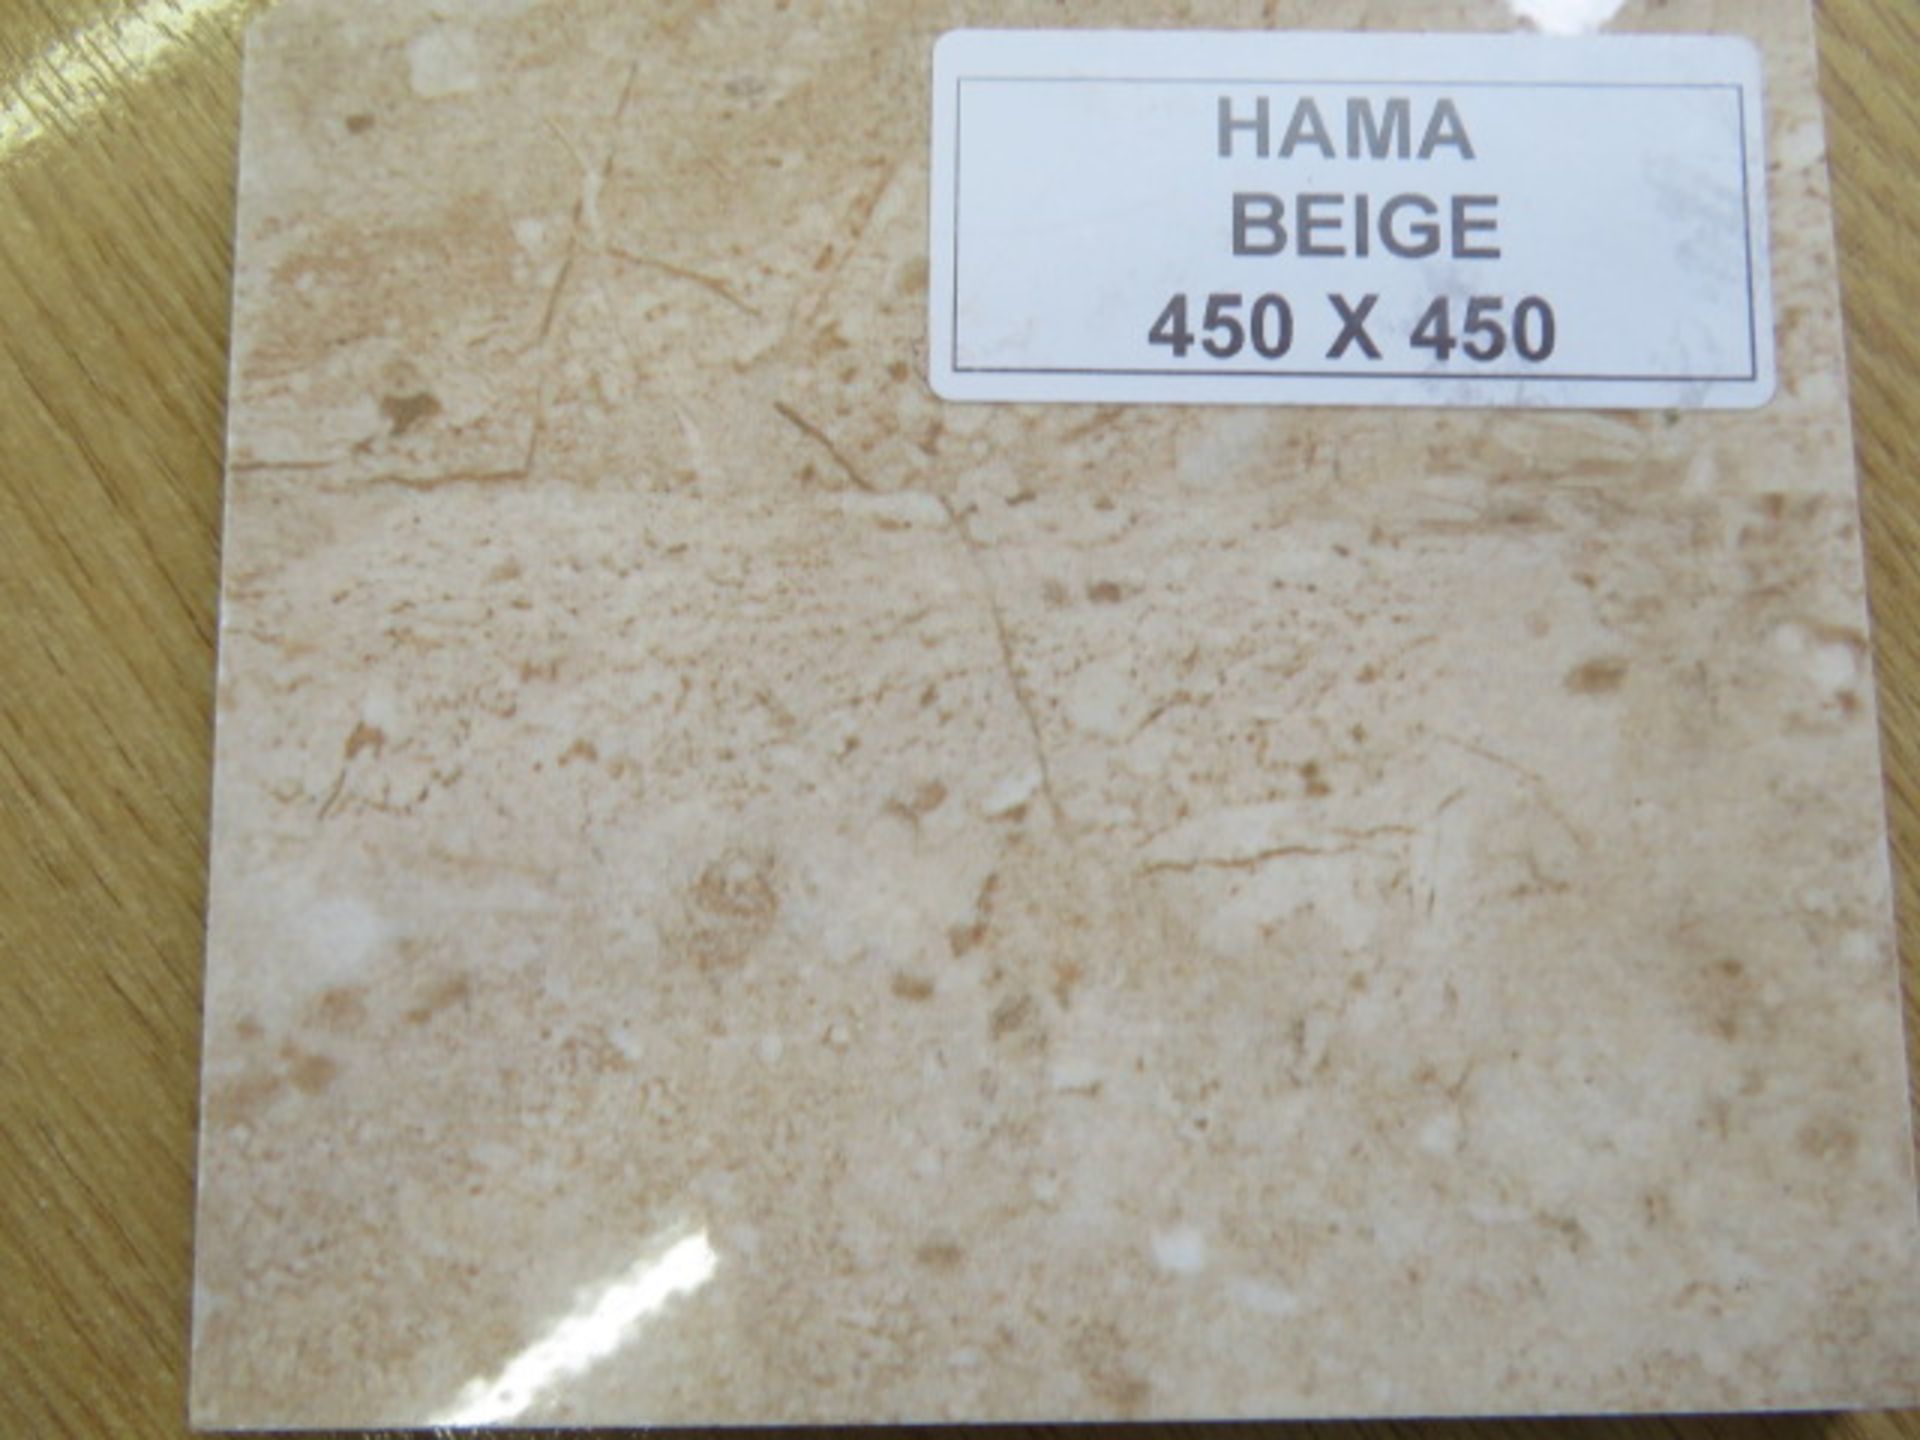 NEW 8.52m2 Hama Beige Wall and Floor Tiles. 450x450mm per tile, 10mm thick. Initially ceramic f... - Image 2 of 2